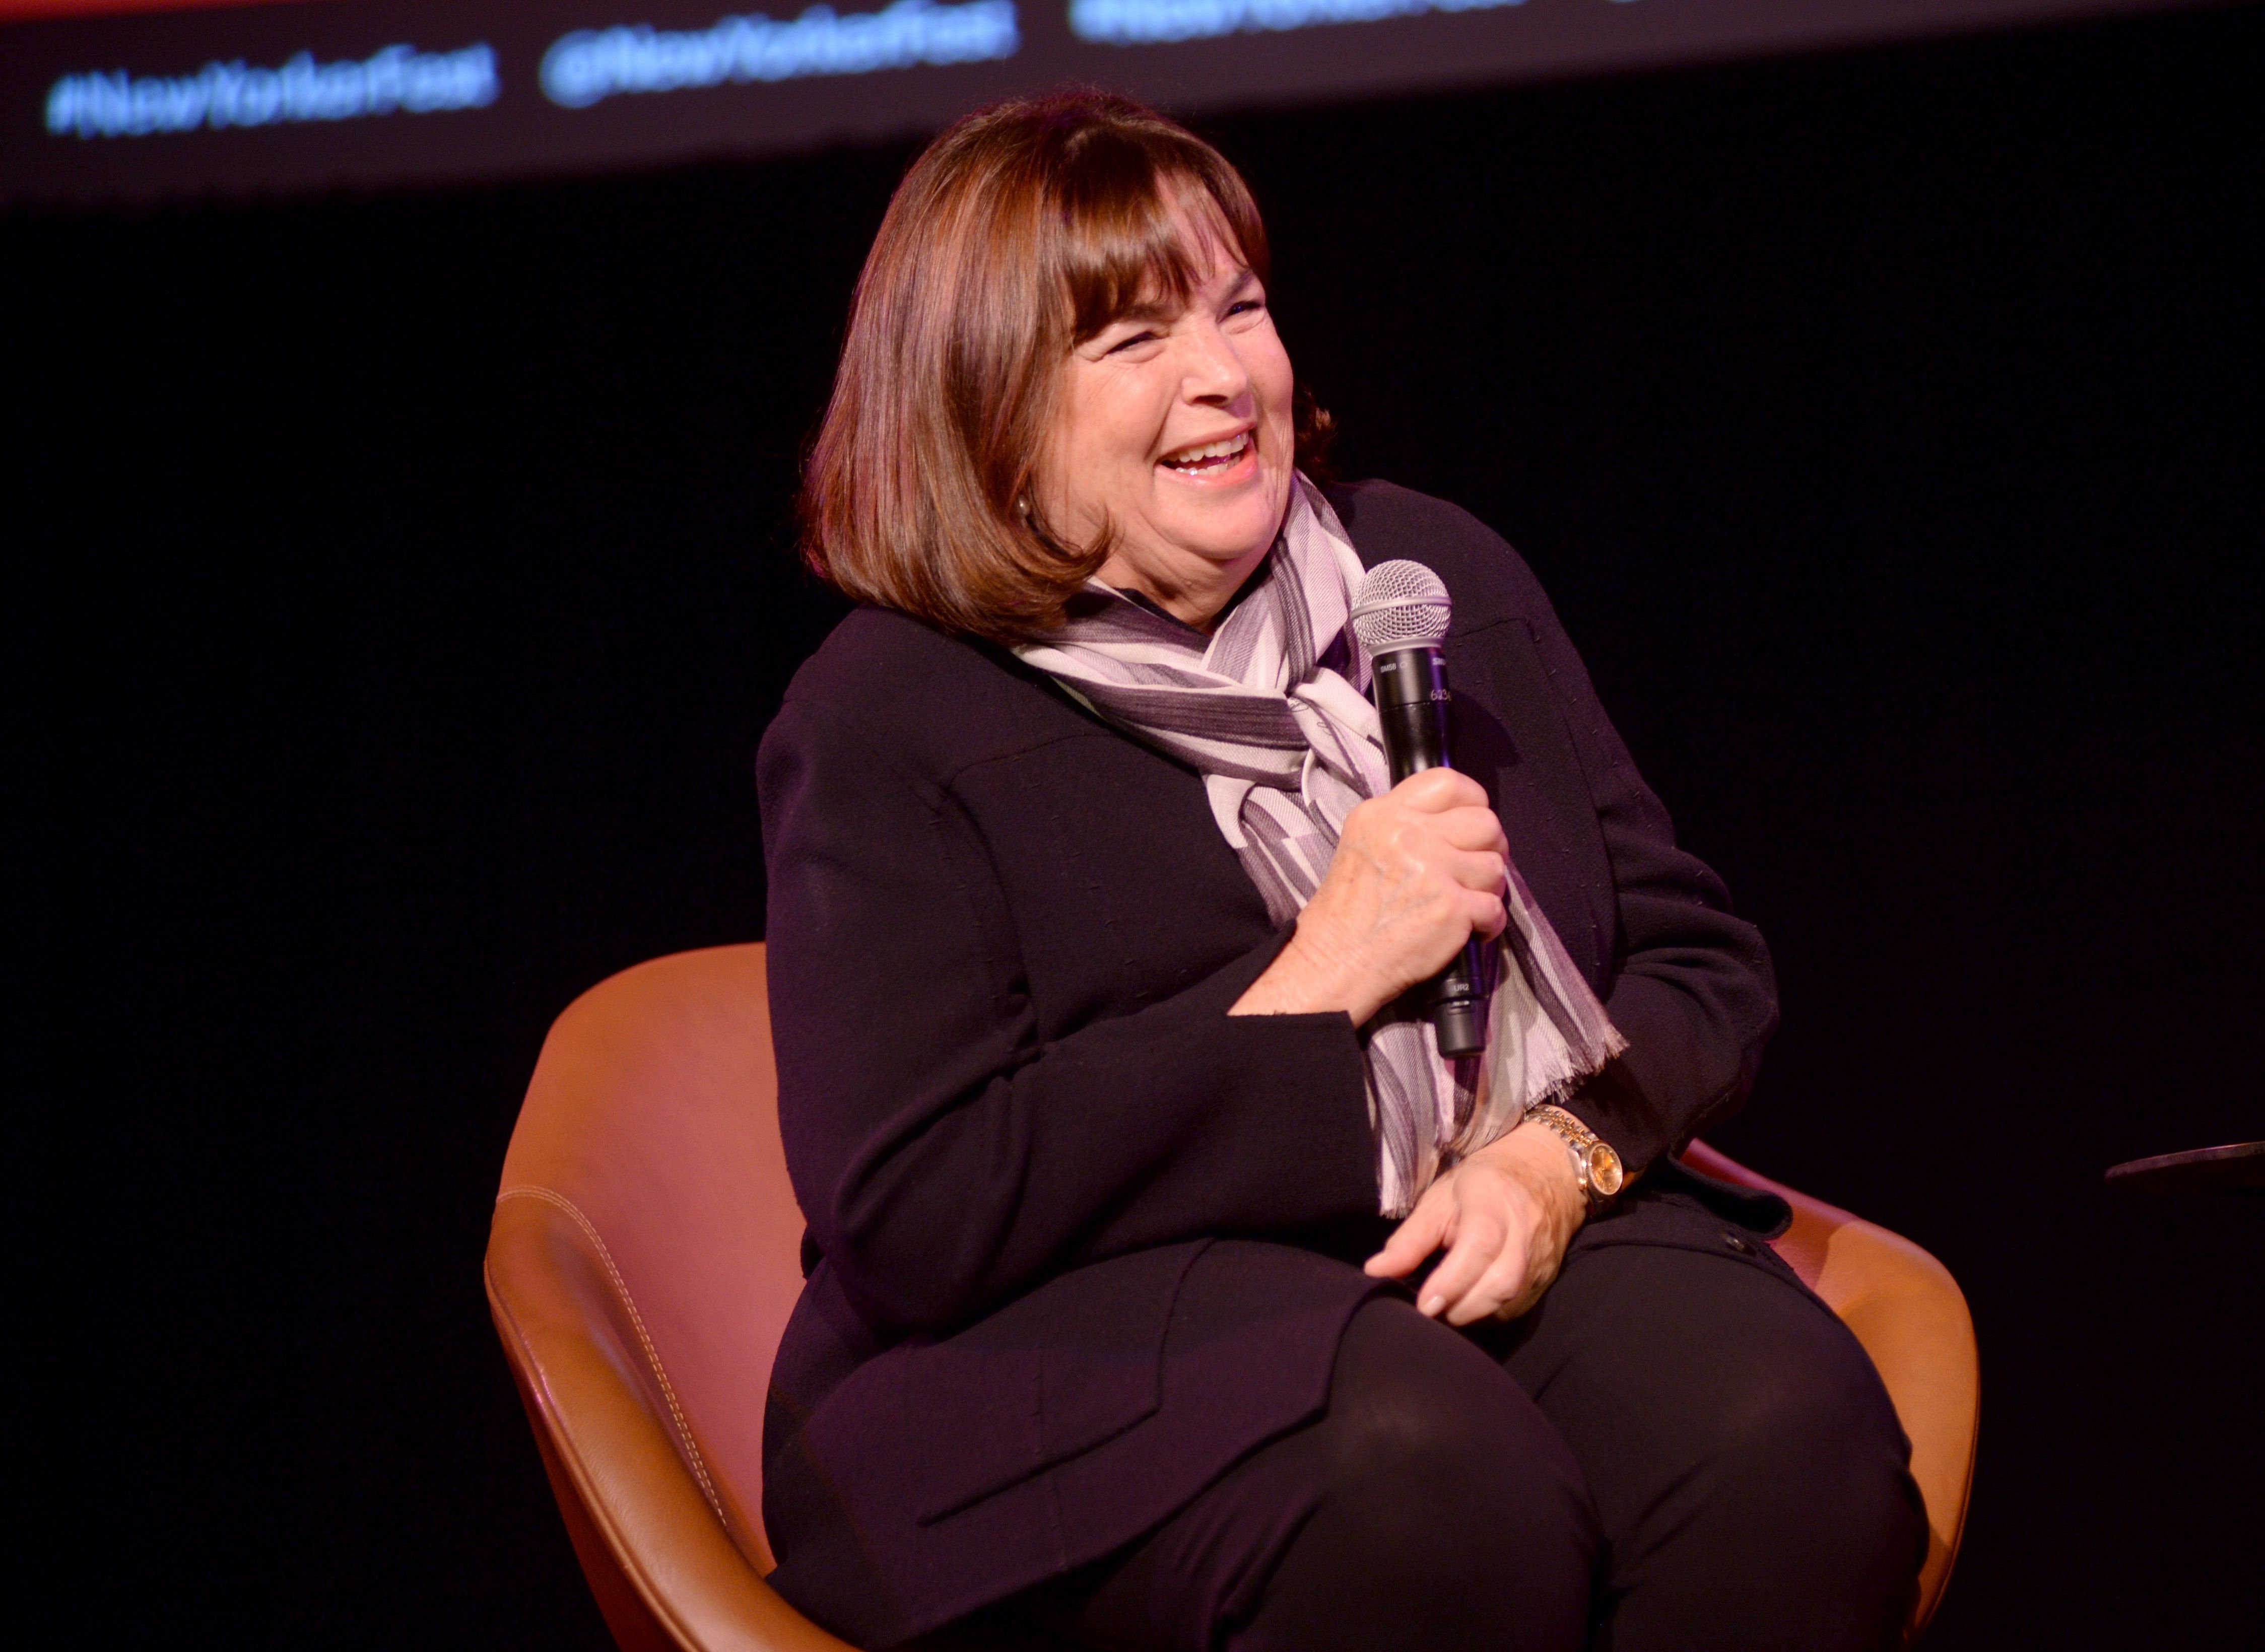 Ina Garten speaks onstage at a talk with Helen Rosner at the 2019 New Yorker Festival on October 12, 2019 | Photo: Getty Images